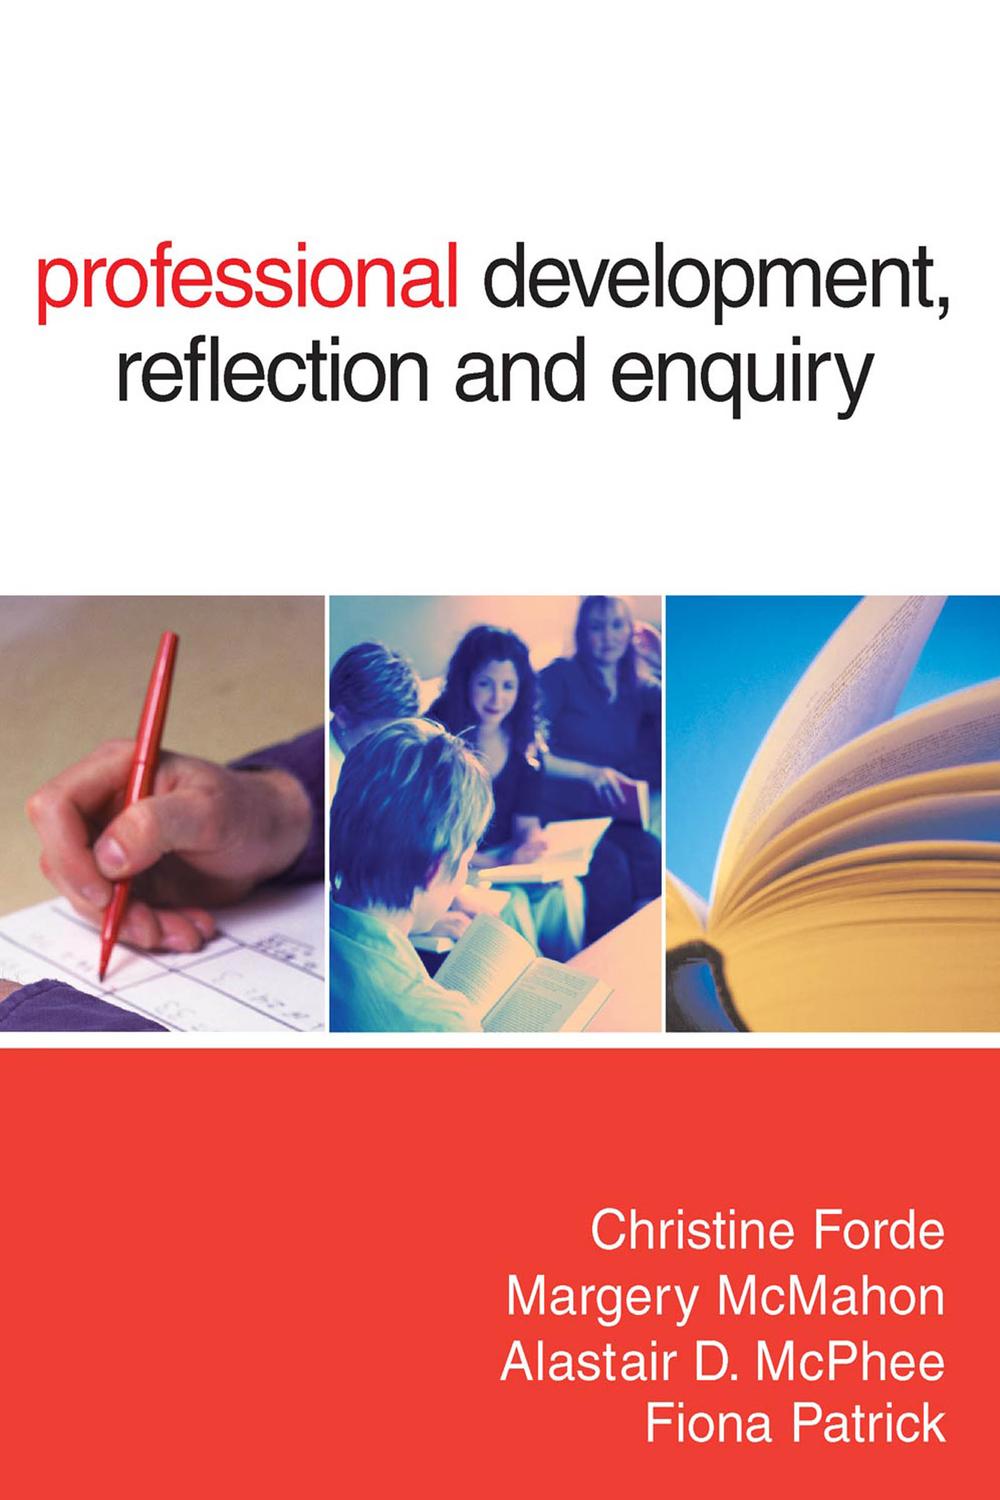 Professional Development, Reflection and Enquiry - Christine Forde, Margery McMahon, Alastair D McPhee, Fiona Patrick